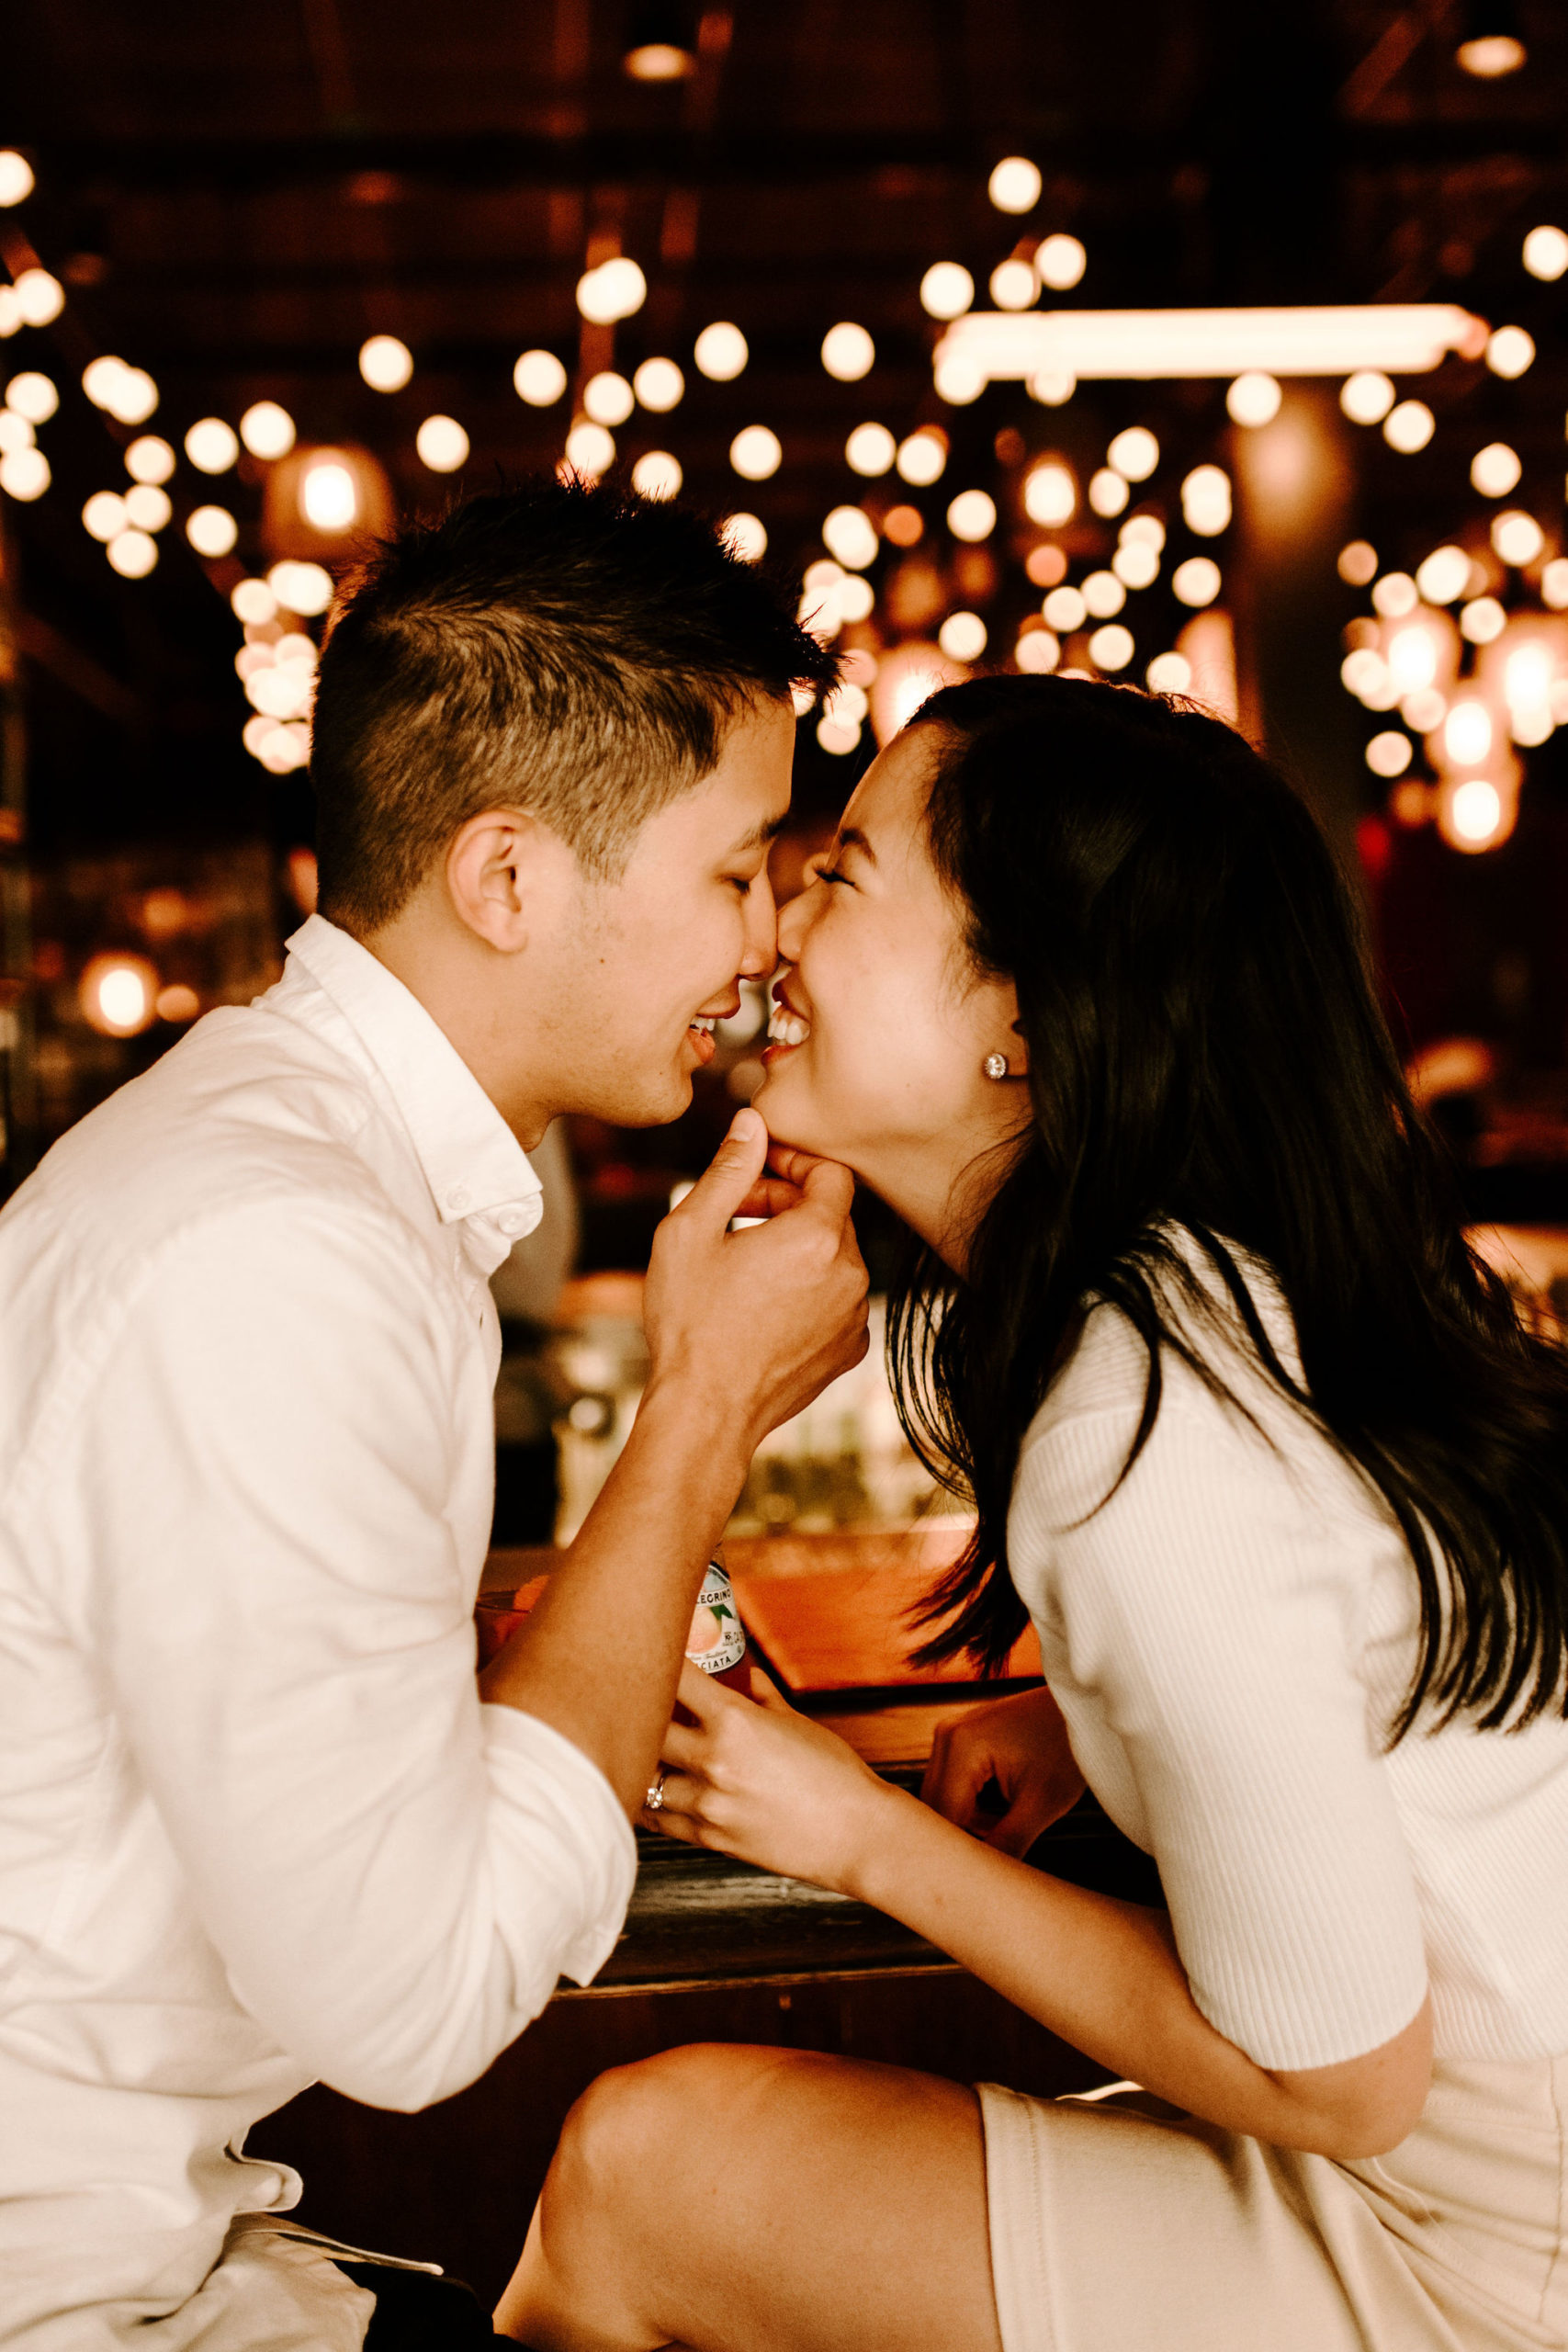 Chicago, Illinois | Five At-Home Date Night Ideas, Photographs by Teresa, includes posing inspiration for an outdoor couples session. Book your Chicago couples session and browse the blog for more inspiration #couples #photography #couplesphotography #chicagophotographer